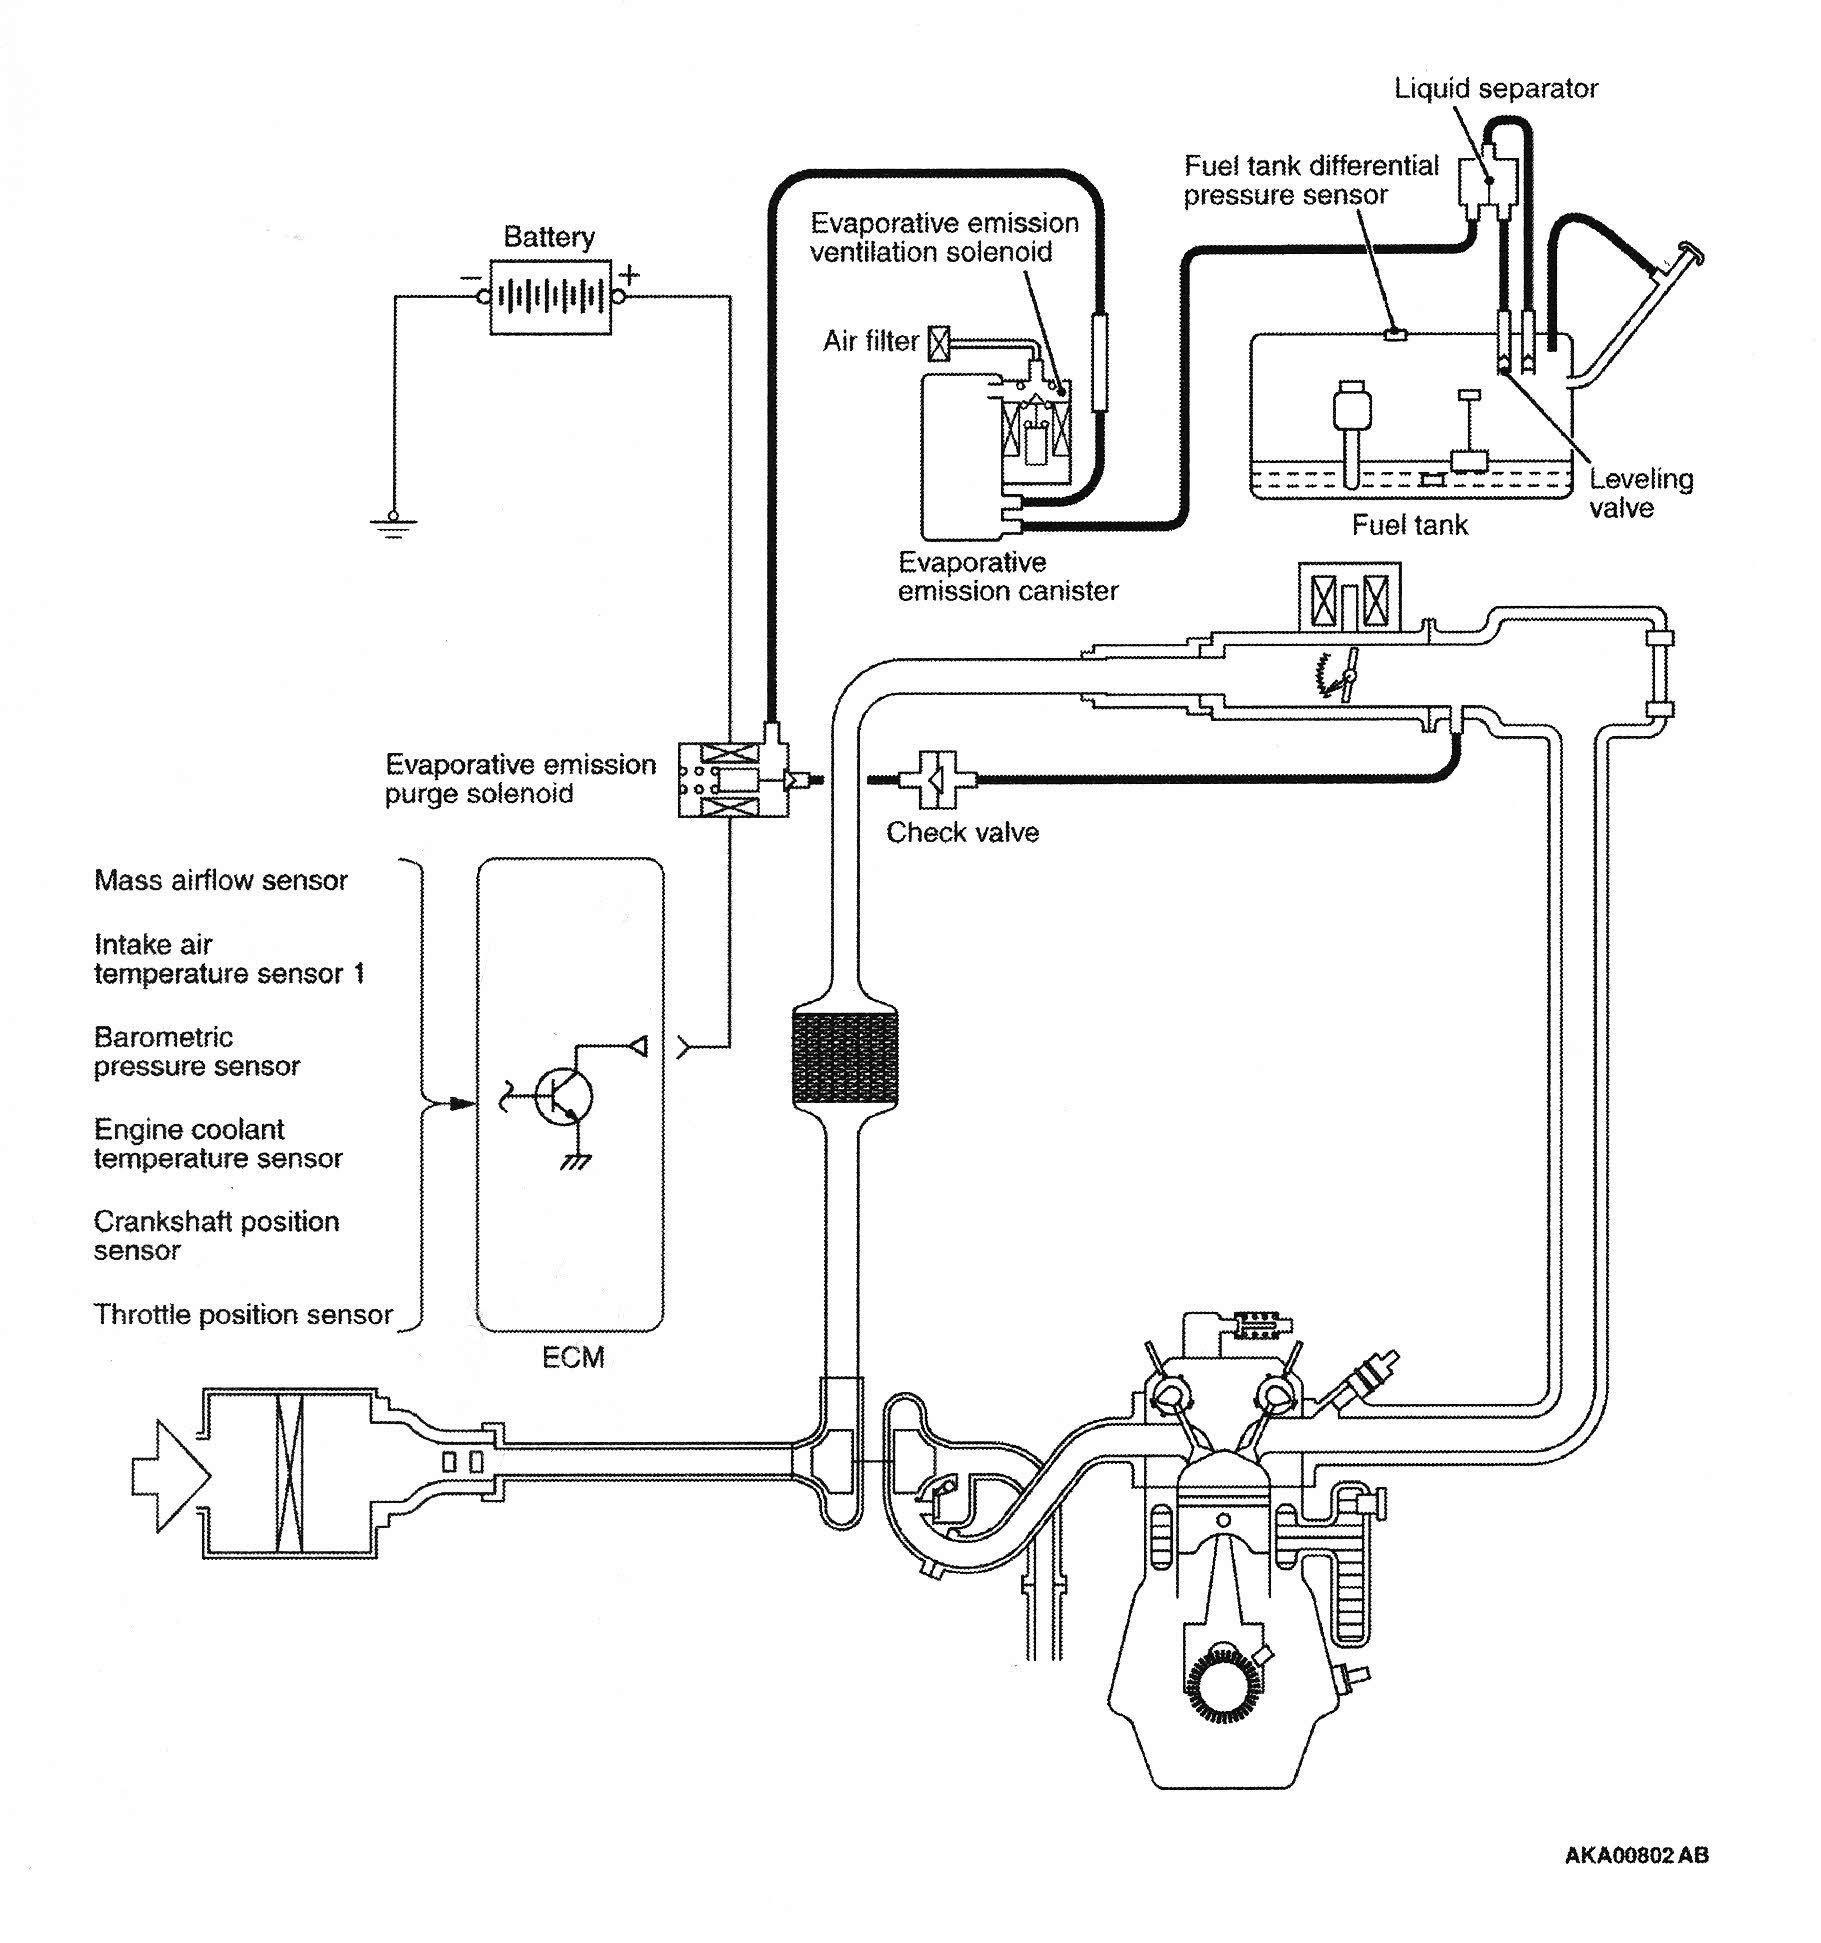 Ab Wiring Diagram 1999 Expedition - Wiring Diagrams